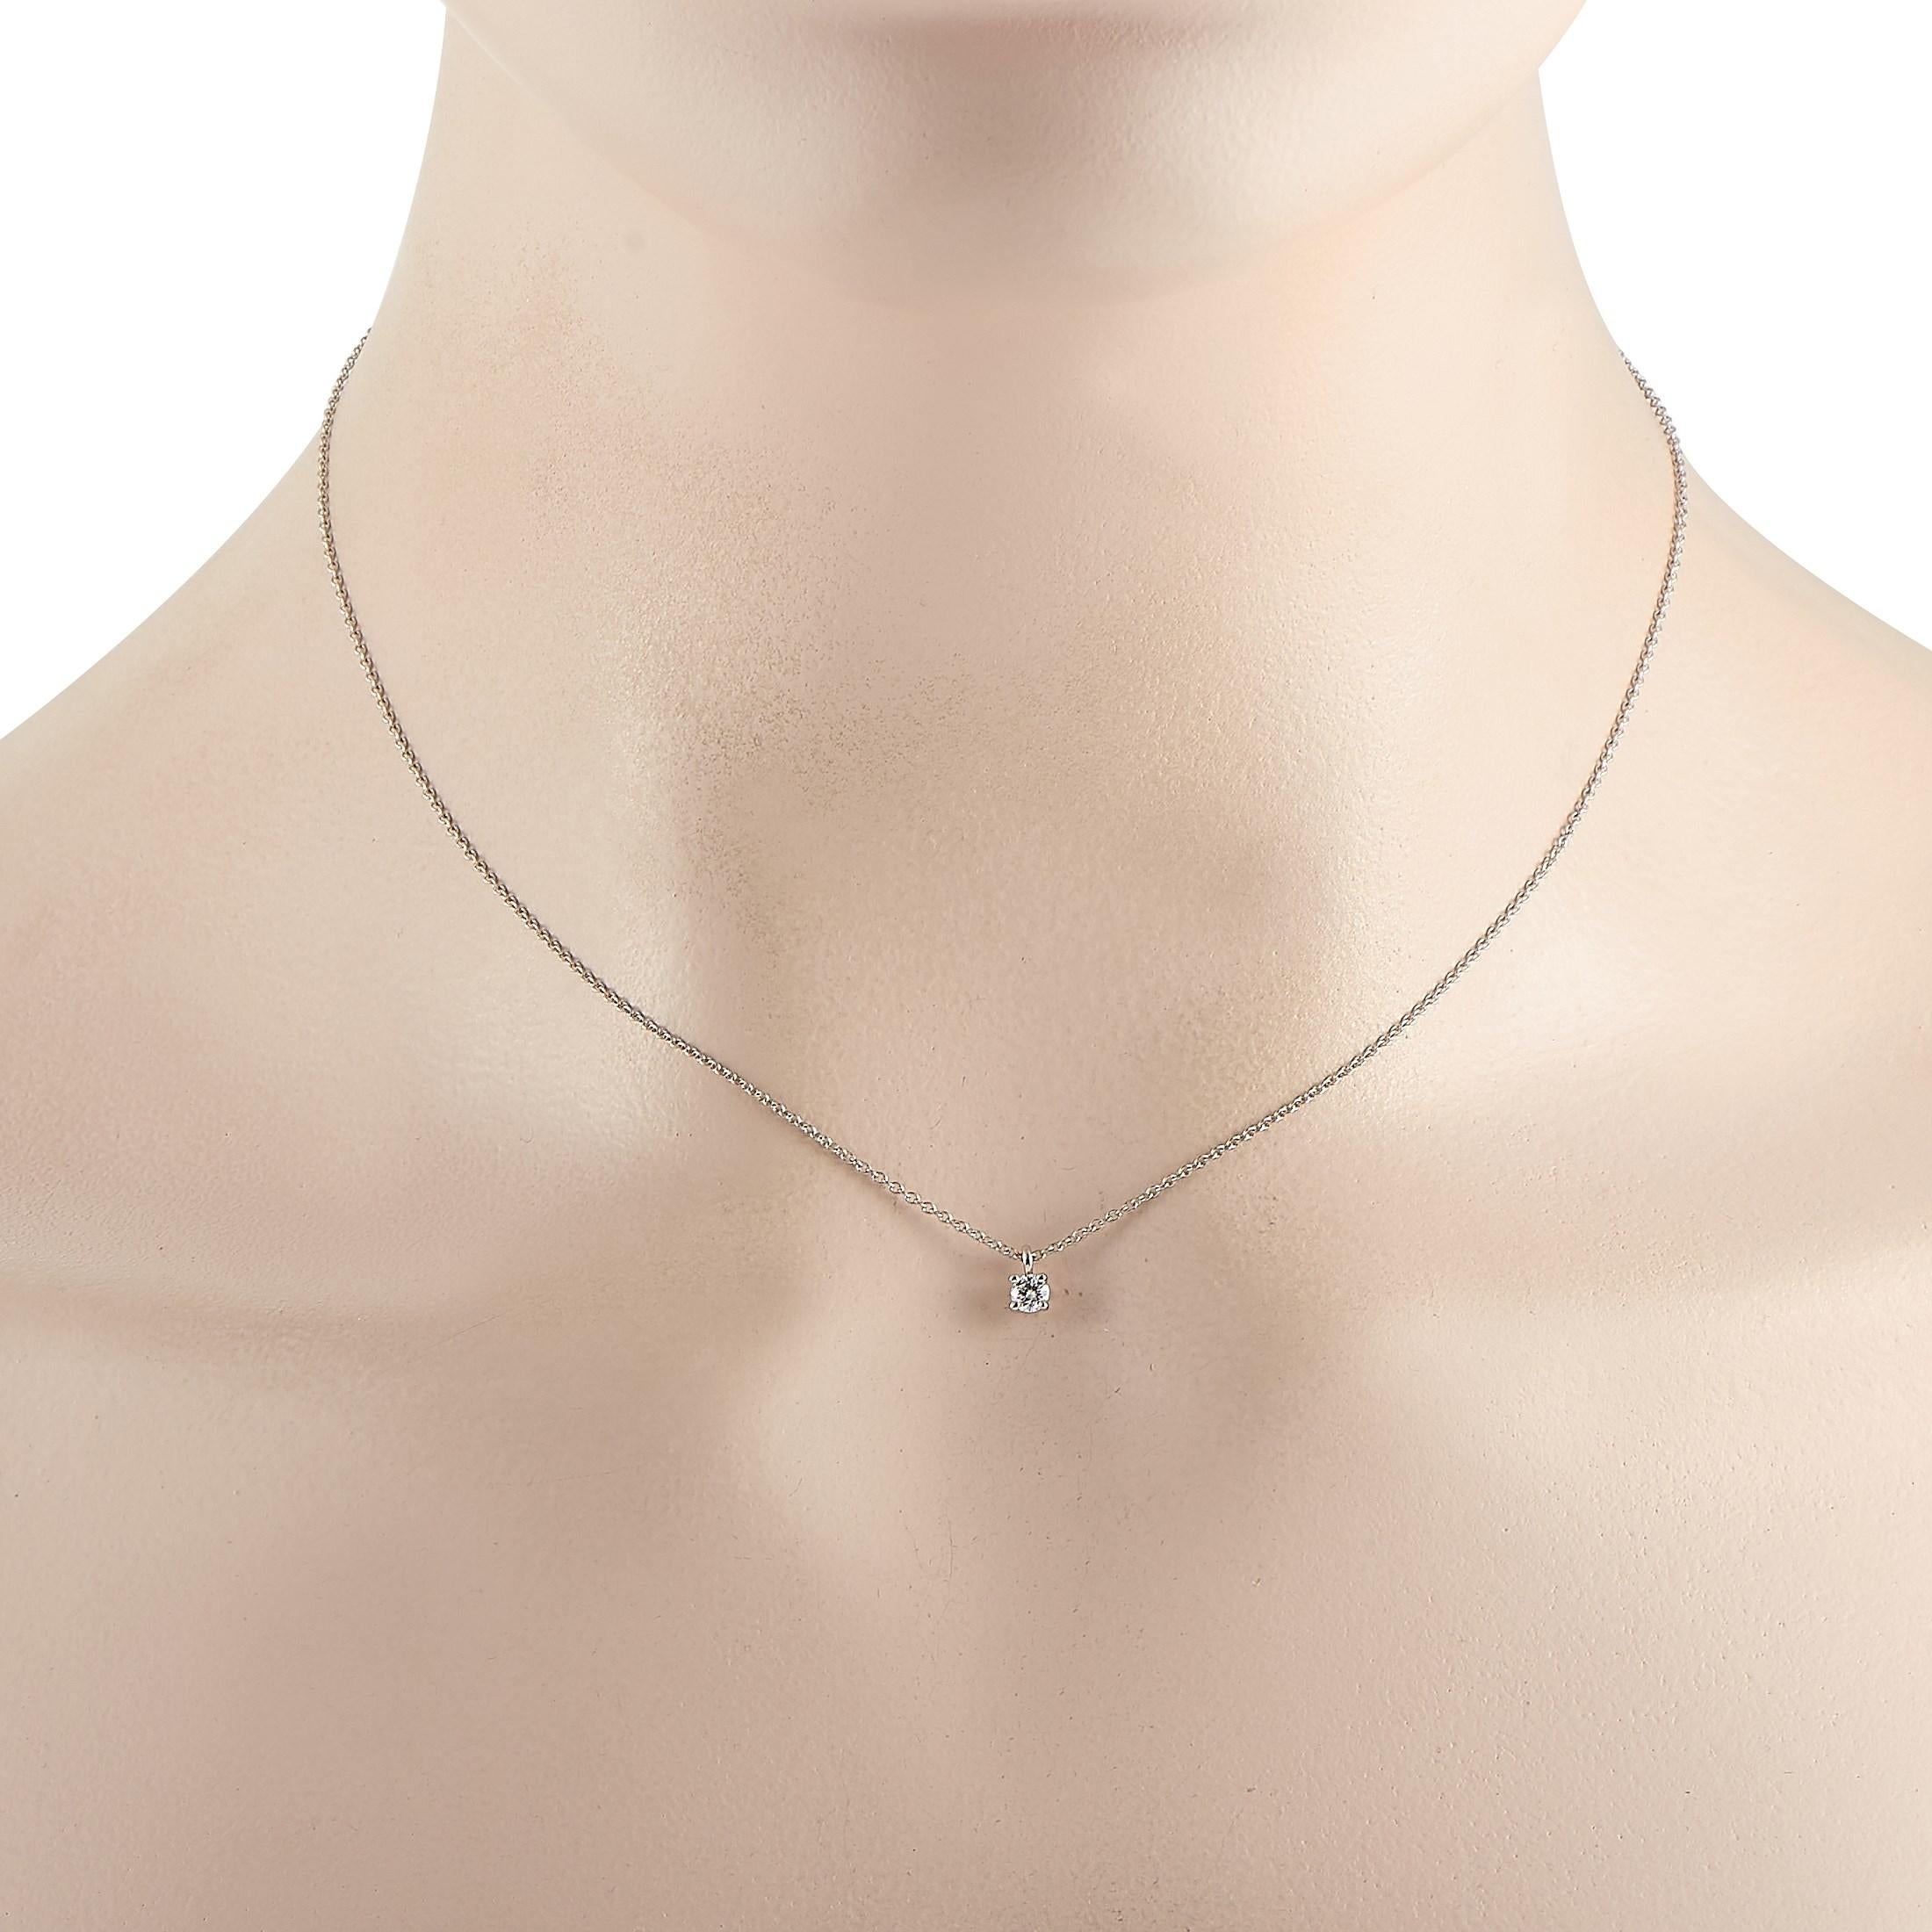 This classic Tiffany & Co. Platinum 0.15 ct Diamond Solitaire Necklace is made with Platinum and features a solitary 0.15 carat diamond pendant held in place by four prongs. The fine platinum chain measures 16 inches in length and features a